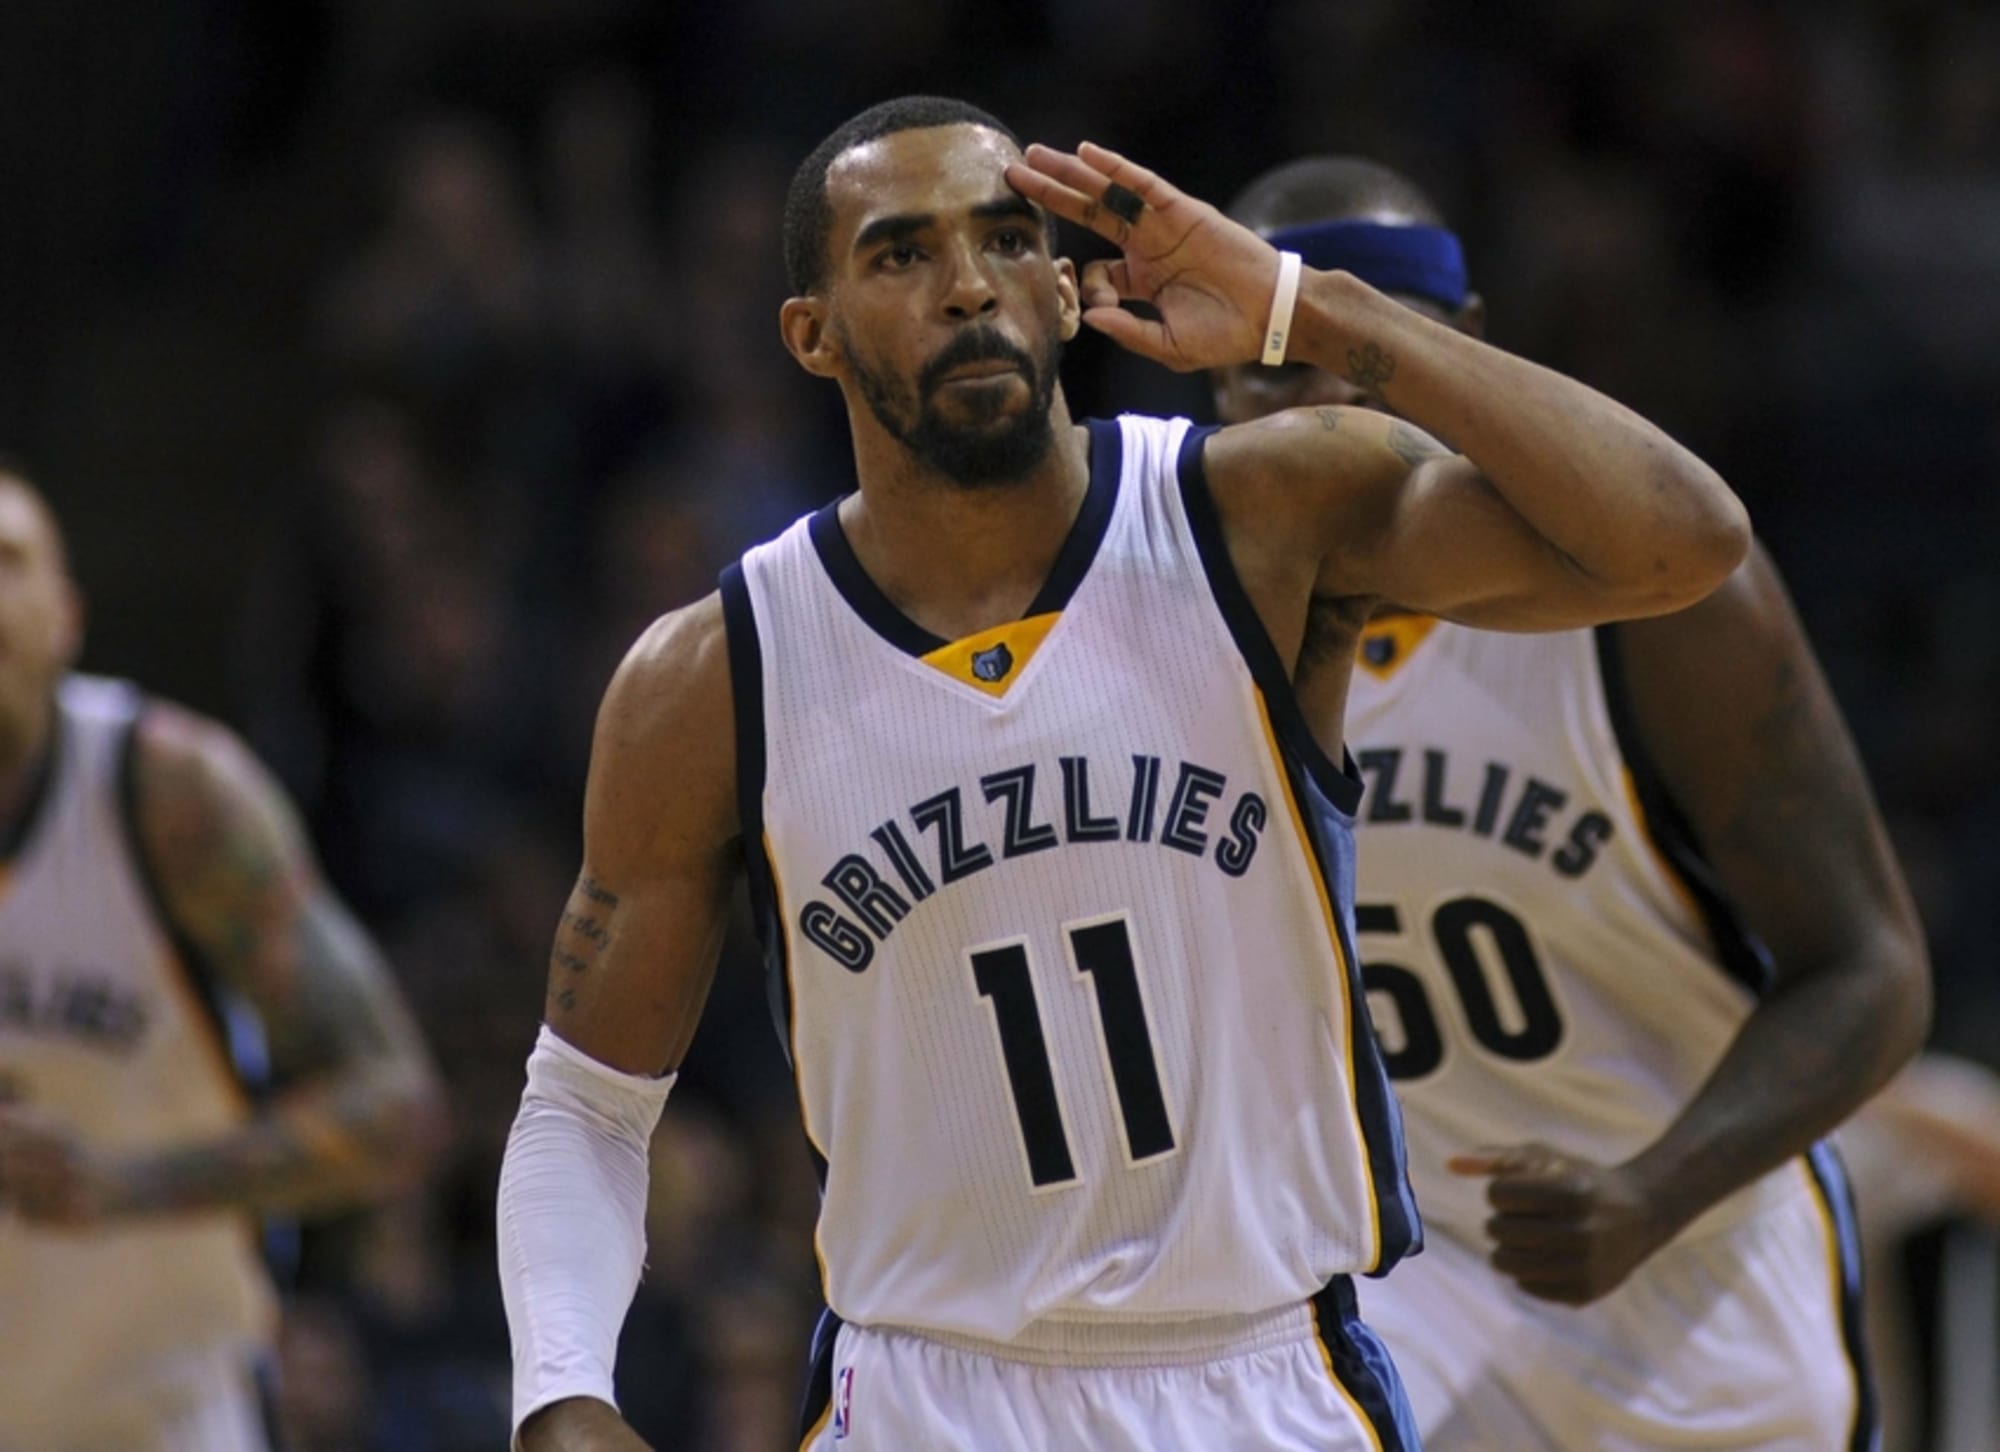 Mike Conley: The Most Underrated NBA Player In The Last Decade